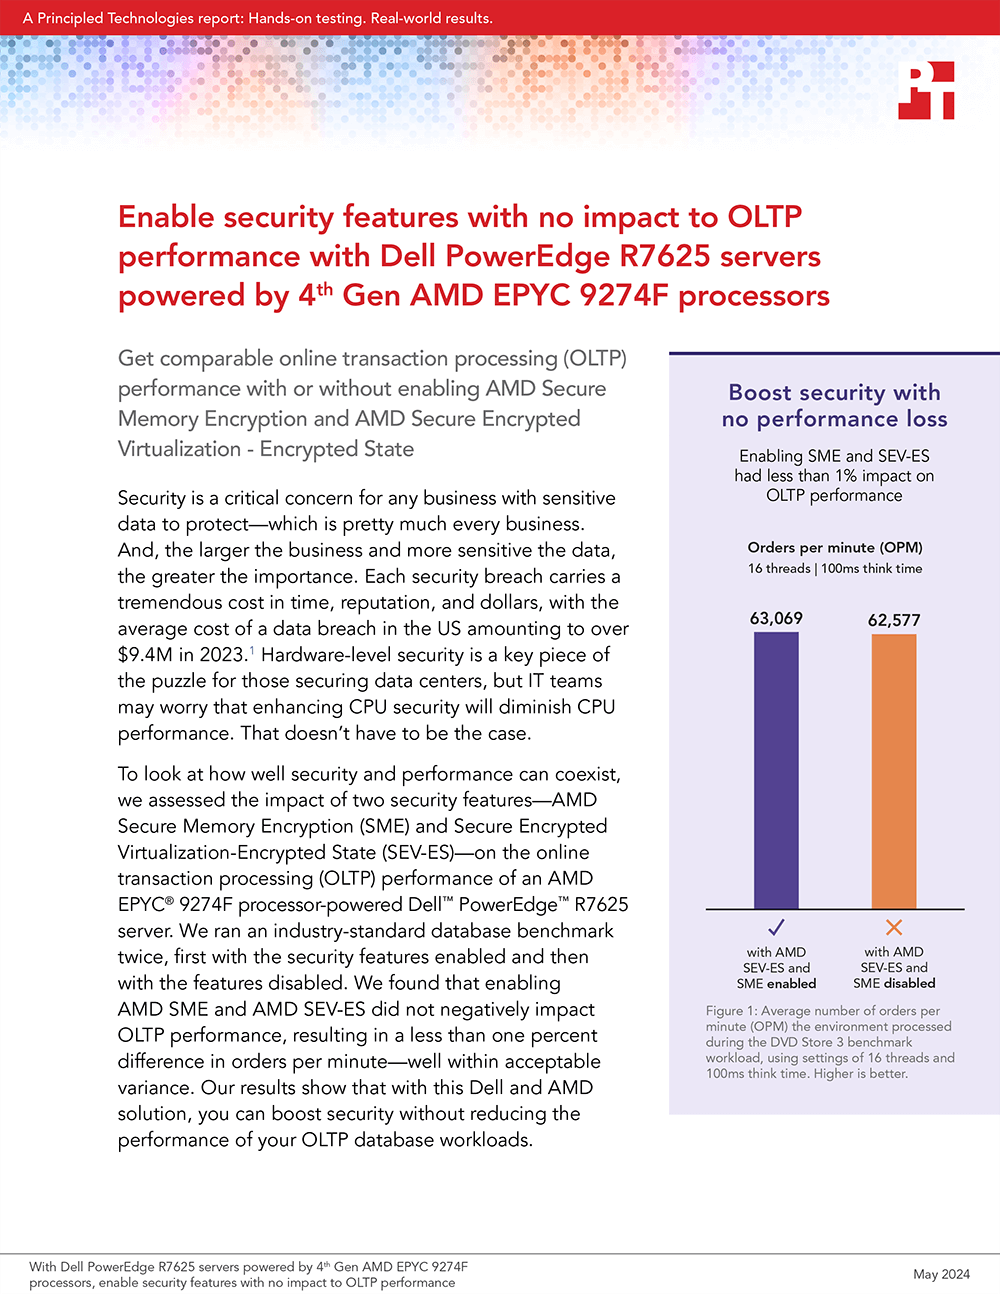 New Principled Technologies Study: Enabling 4th Gen AMD EPYC 9274F Processor Security Features Did Not Impact a Dell PowerEdge R7625 Server’s OLTP Performance